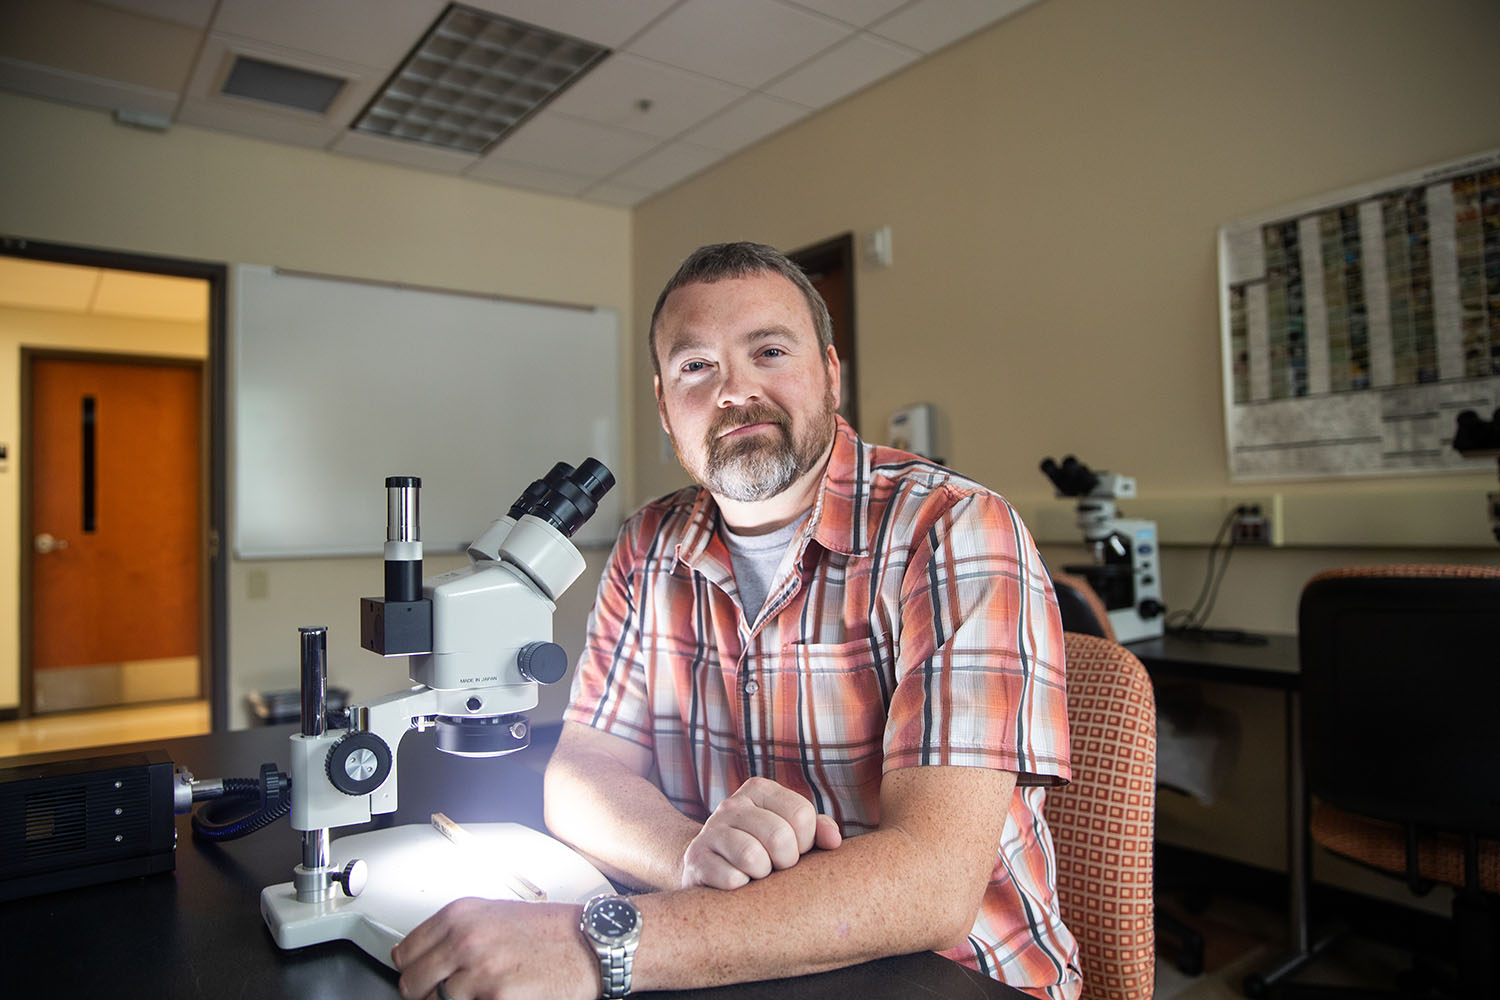 Chris Gentry poses for photo in McCord lab